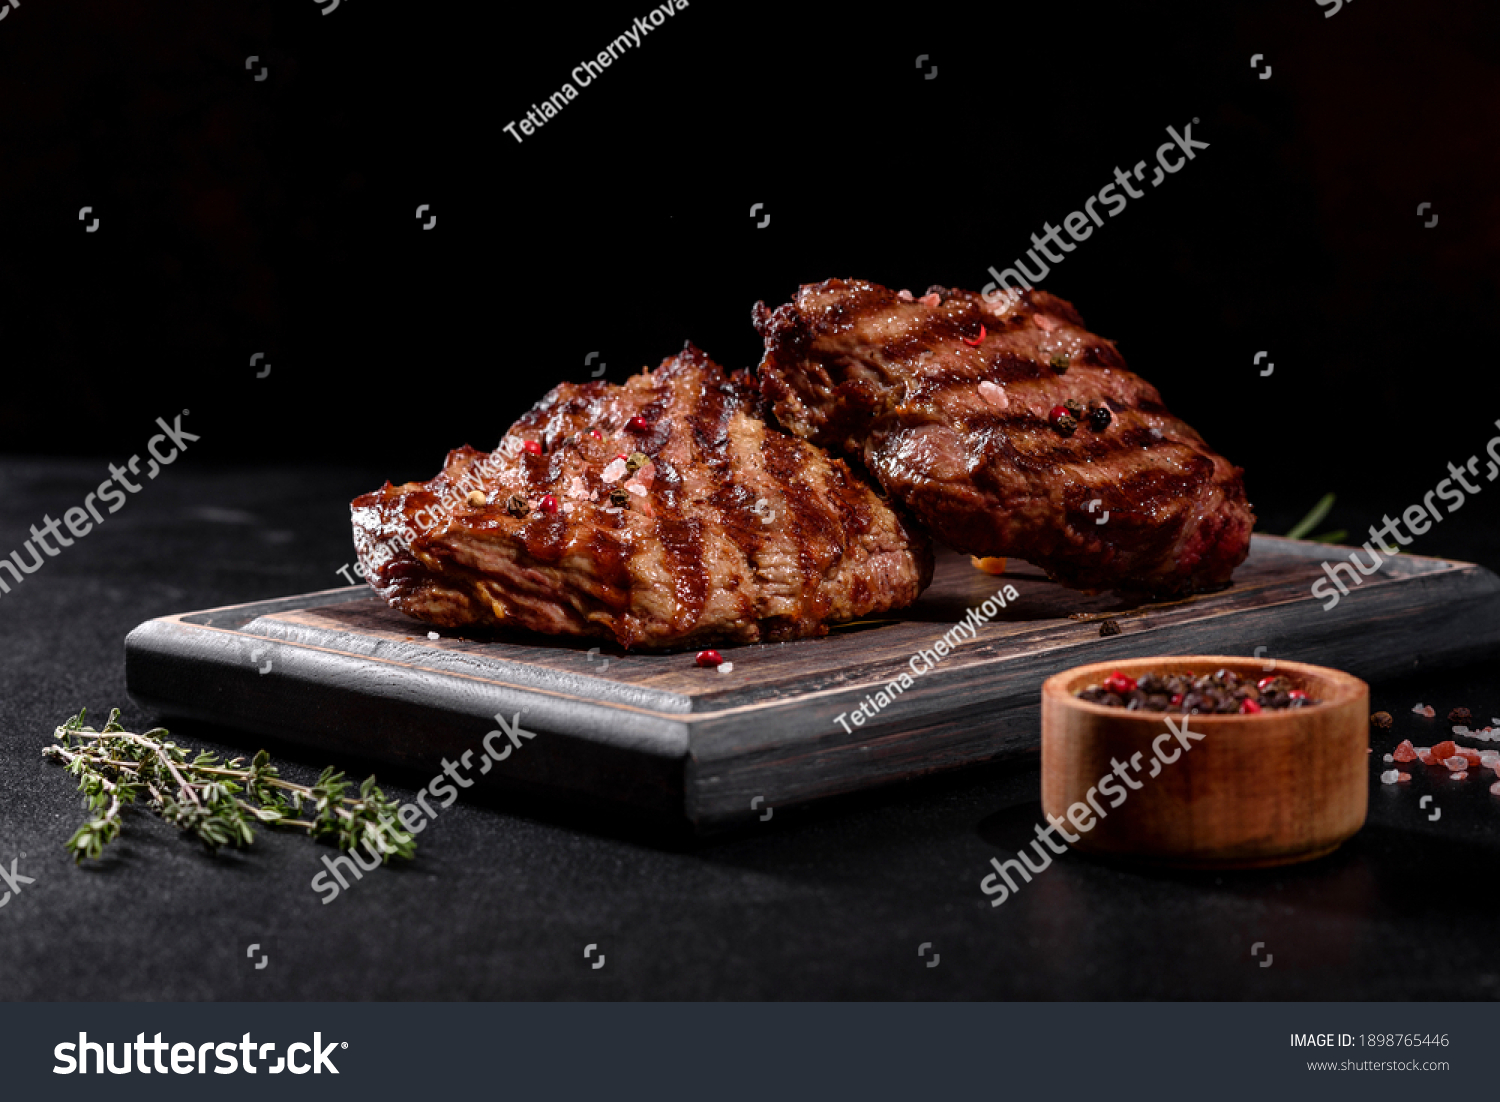 Fresh juicy delicious beef steak on a dark background. Meat dish with spices and herbs #1898765446